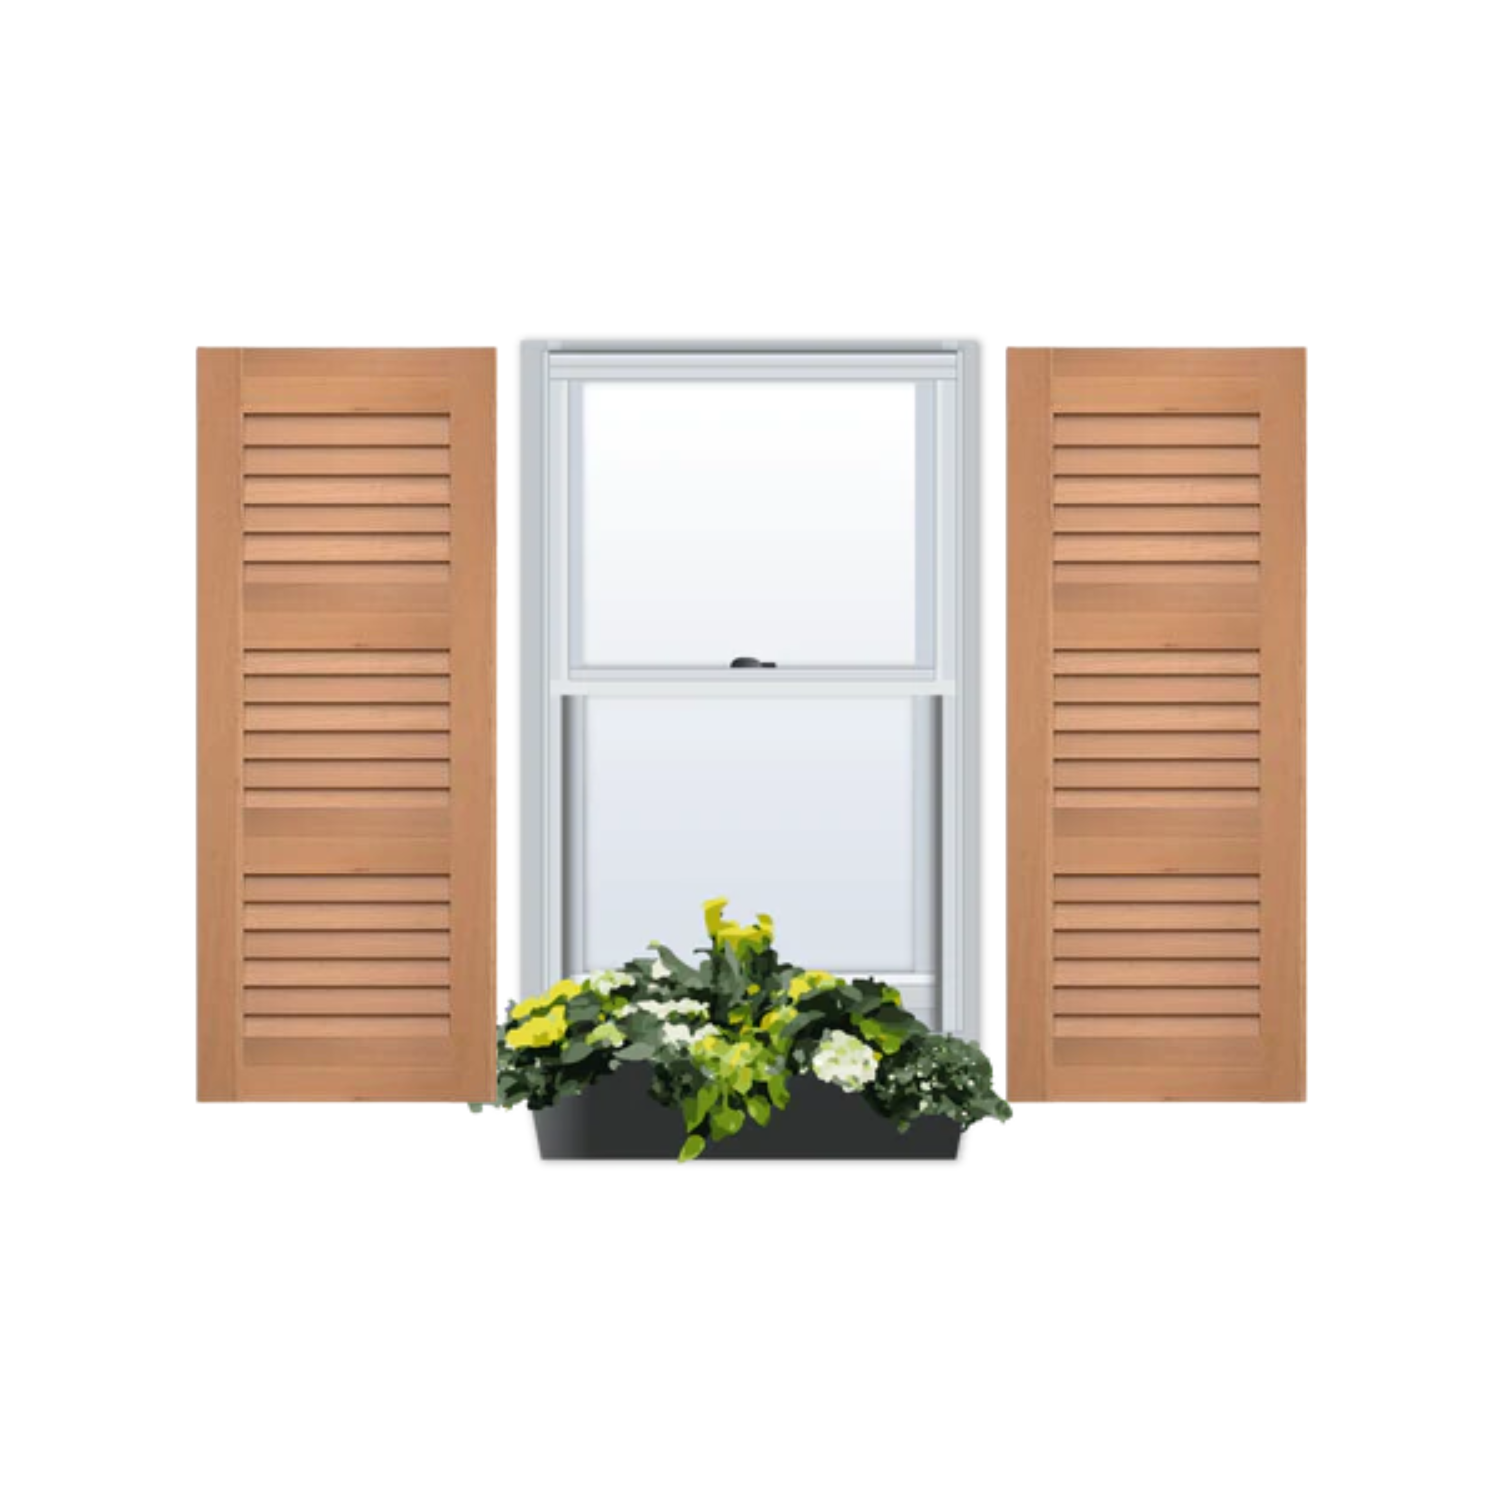 Cedar | Louvered Exterior Shutters | Three Equal Sections | 1 Pair